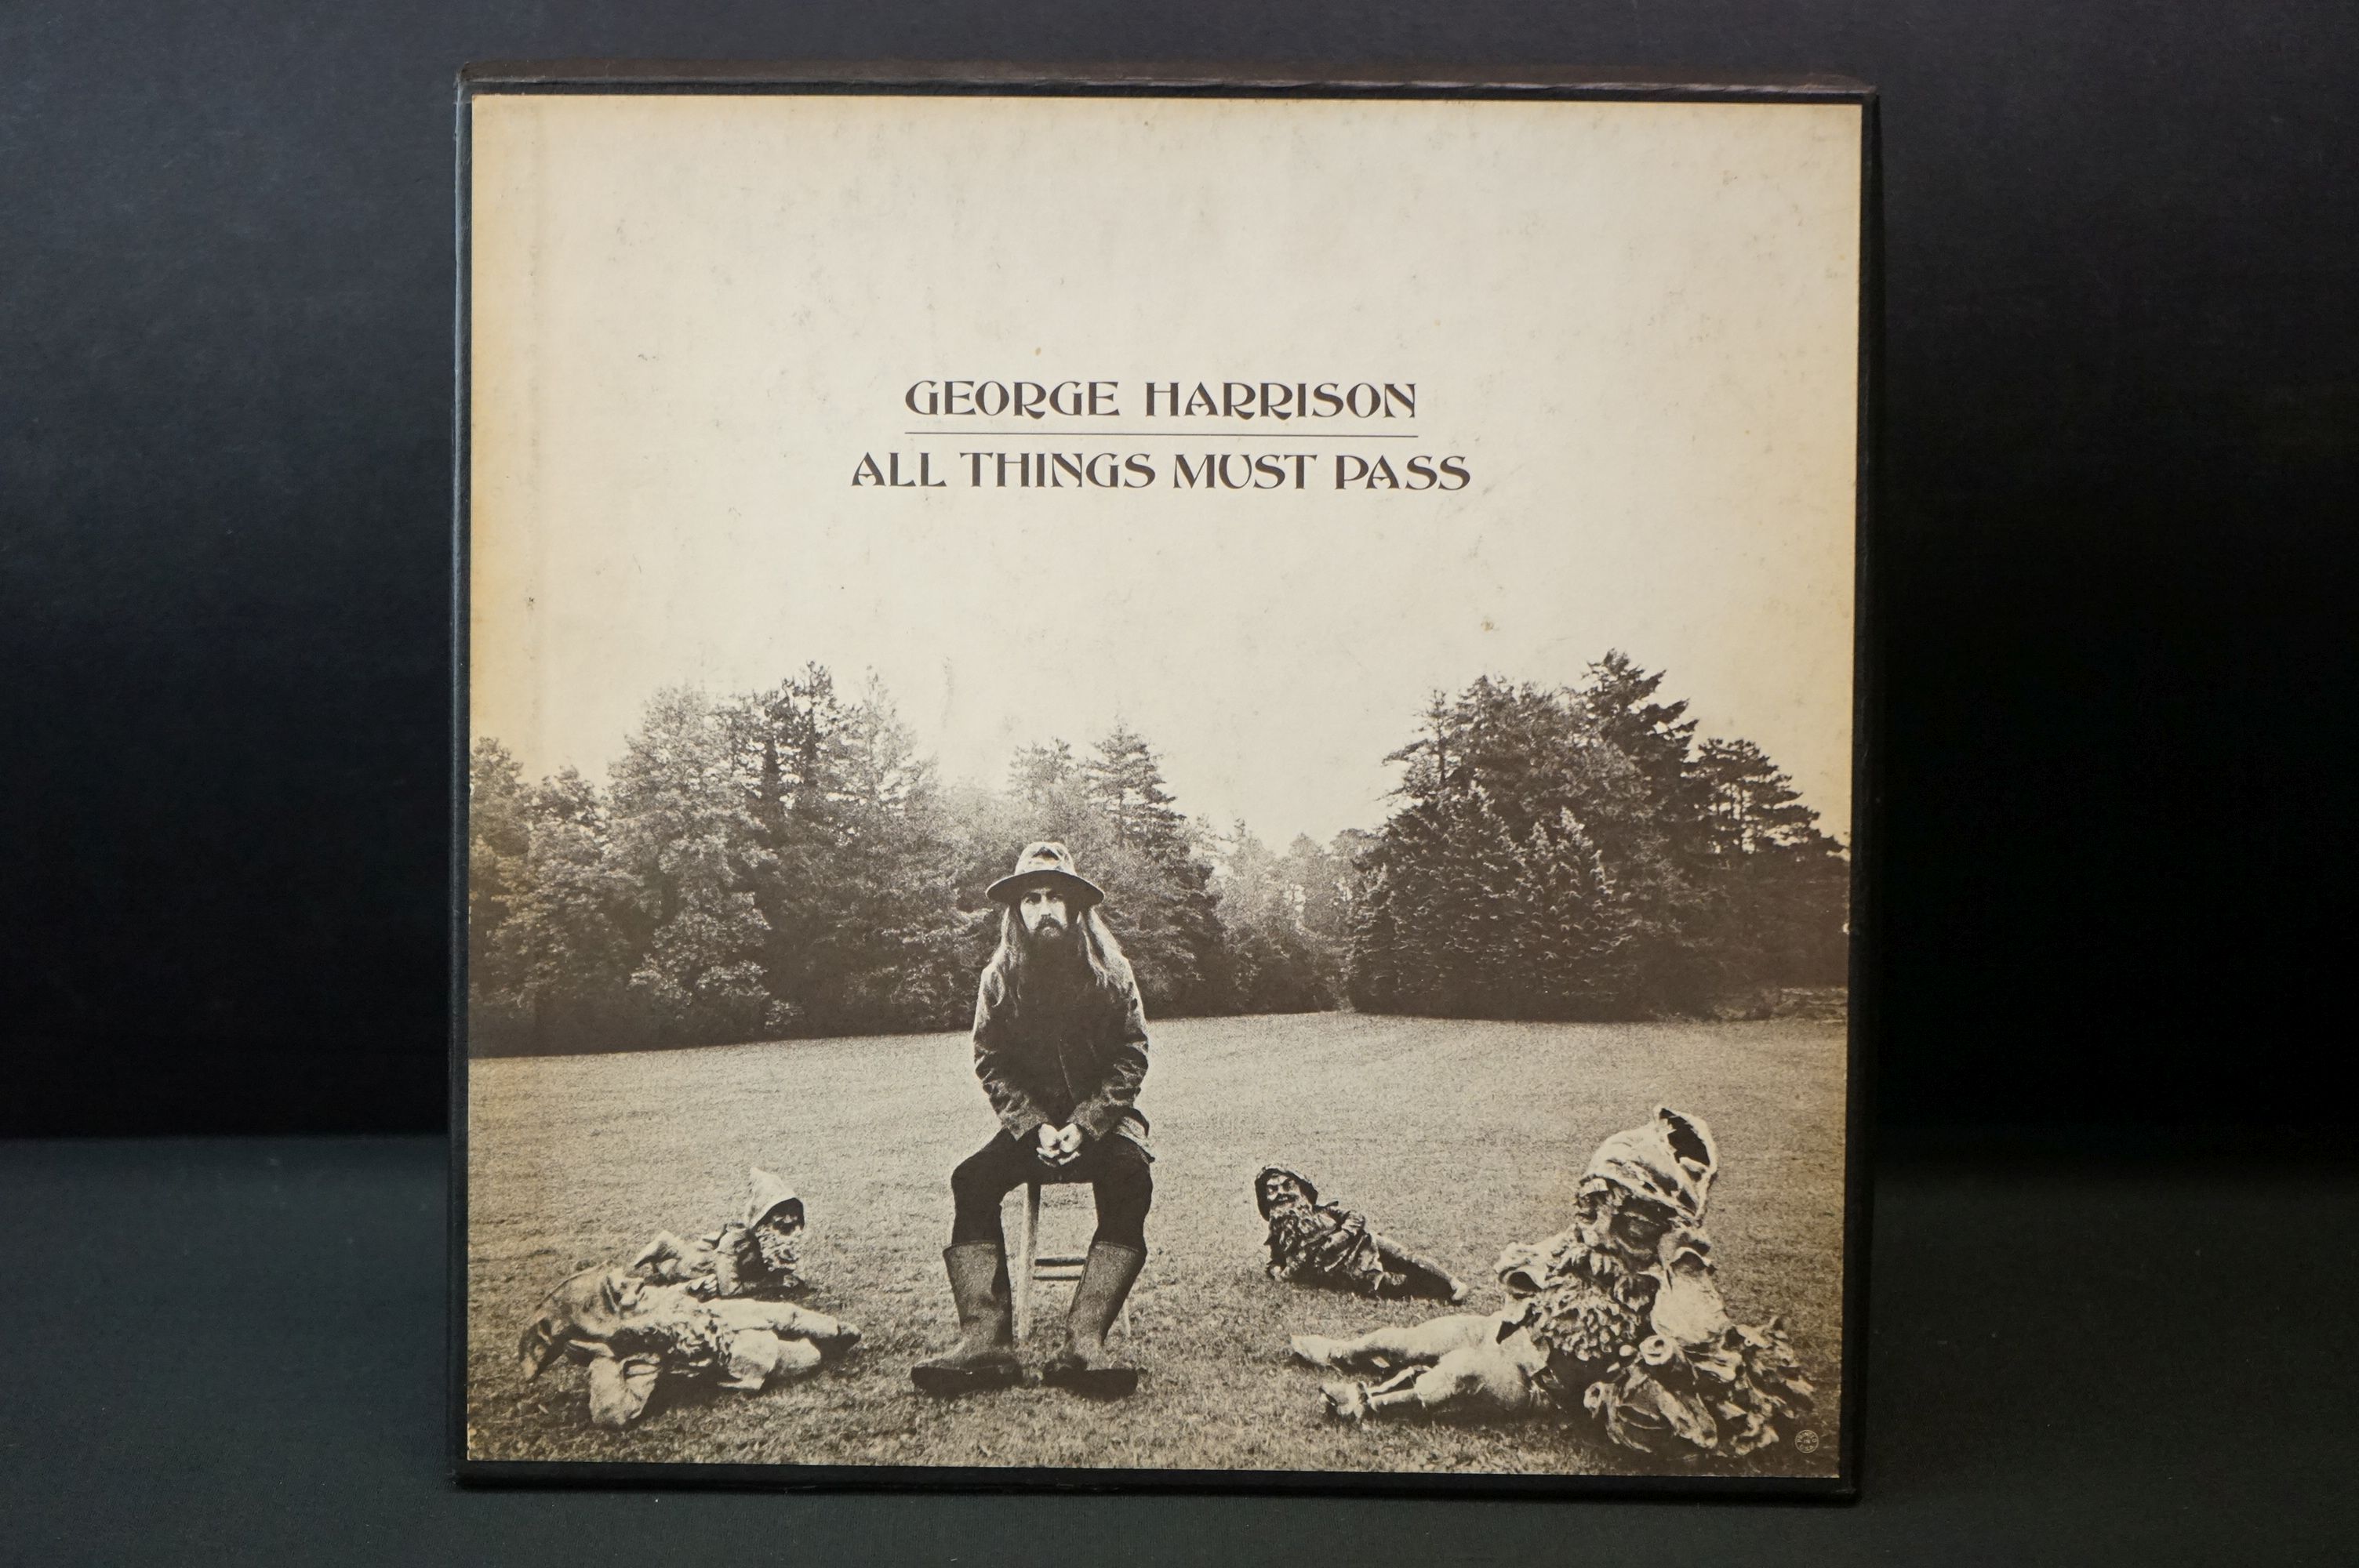 Vinyl - George Harrison All Things Must Pass. Original UK 1st Pressing on Apple Records, (STCH 639),